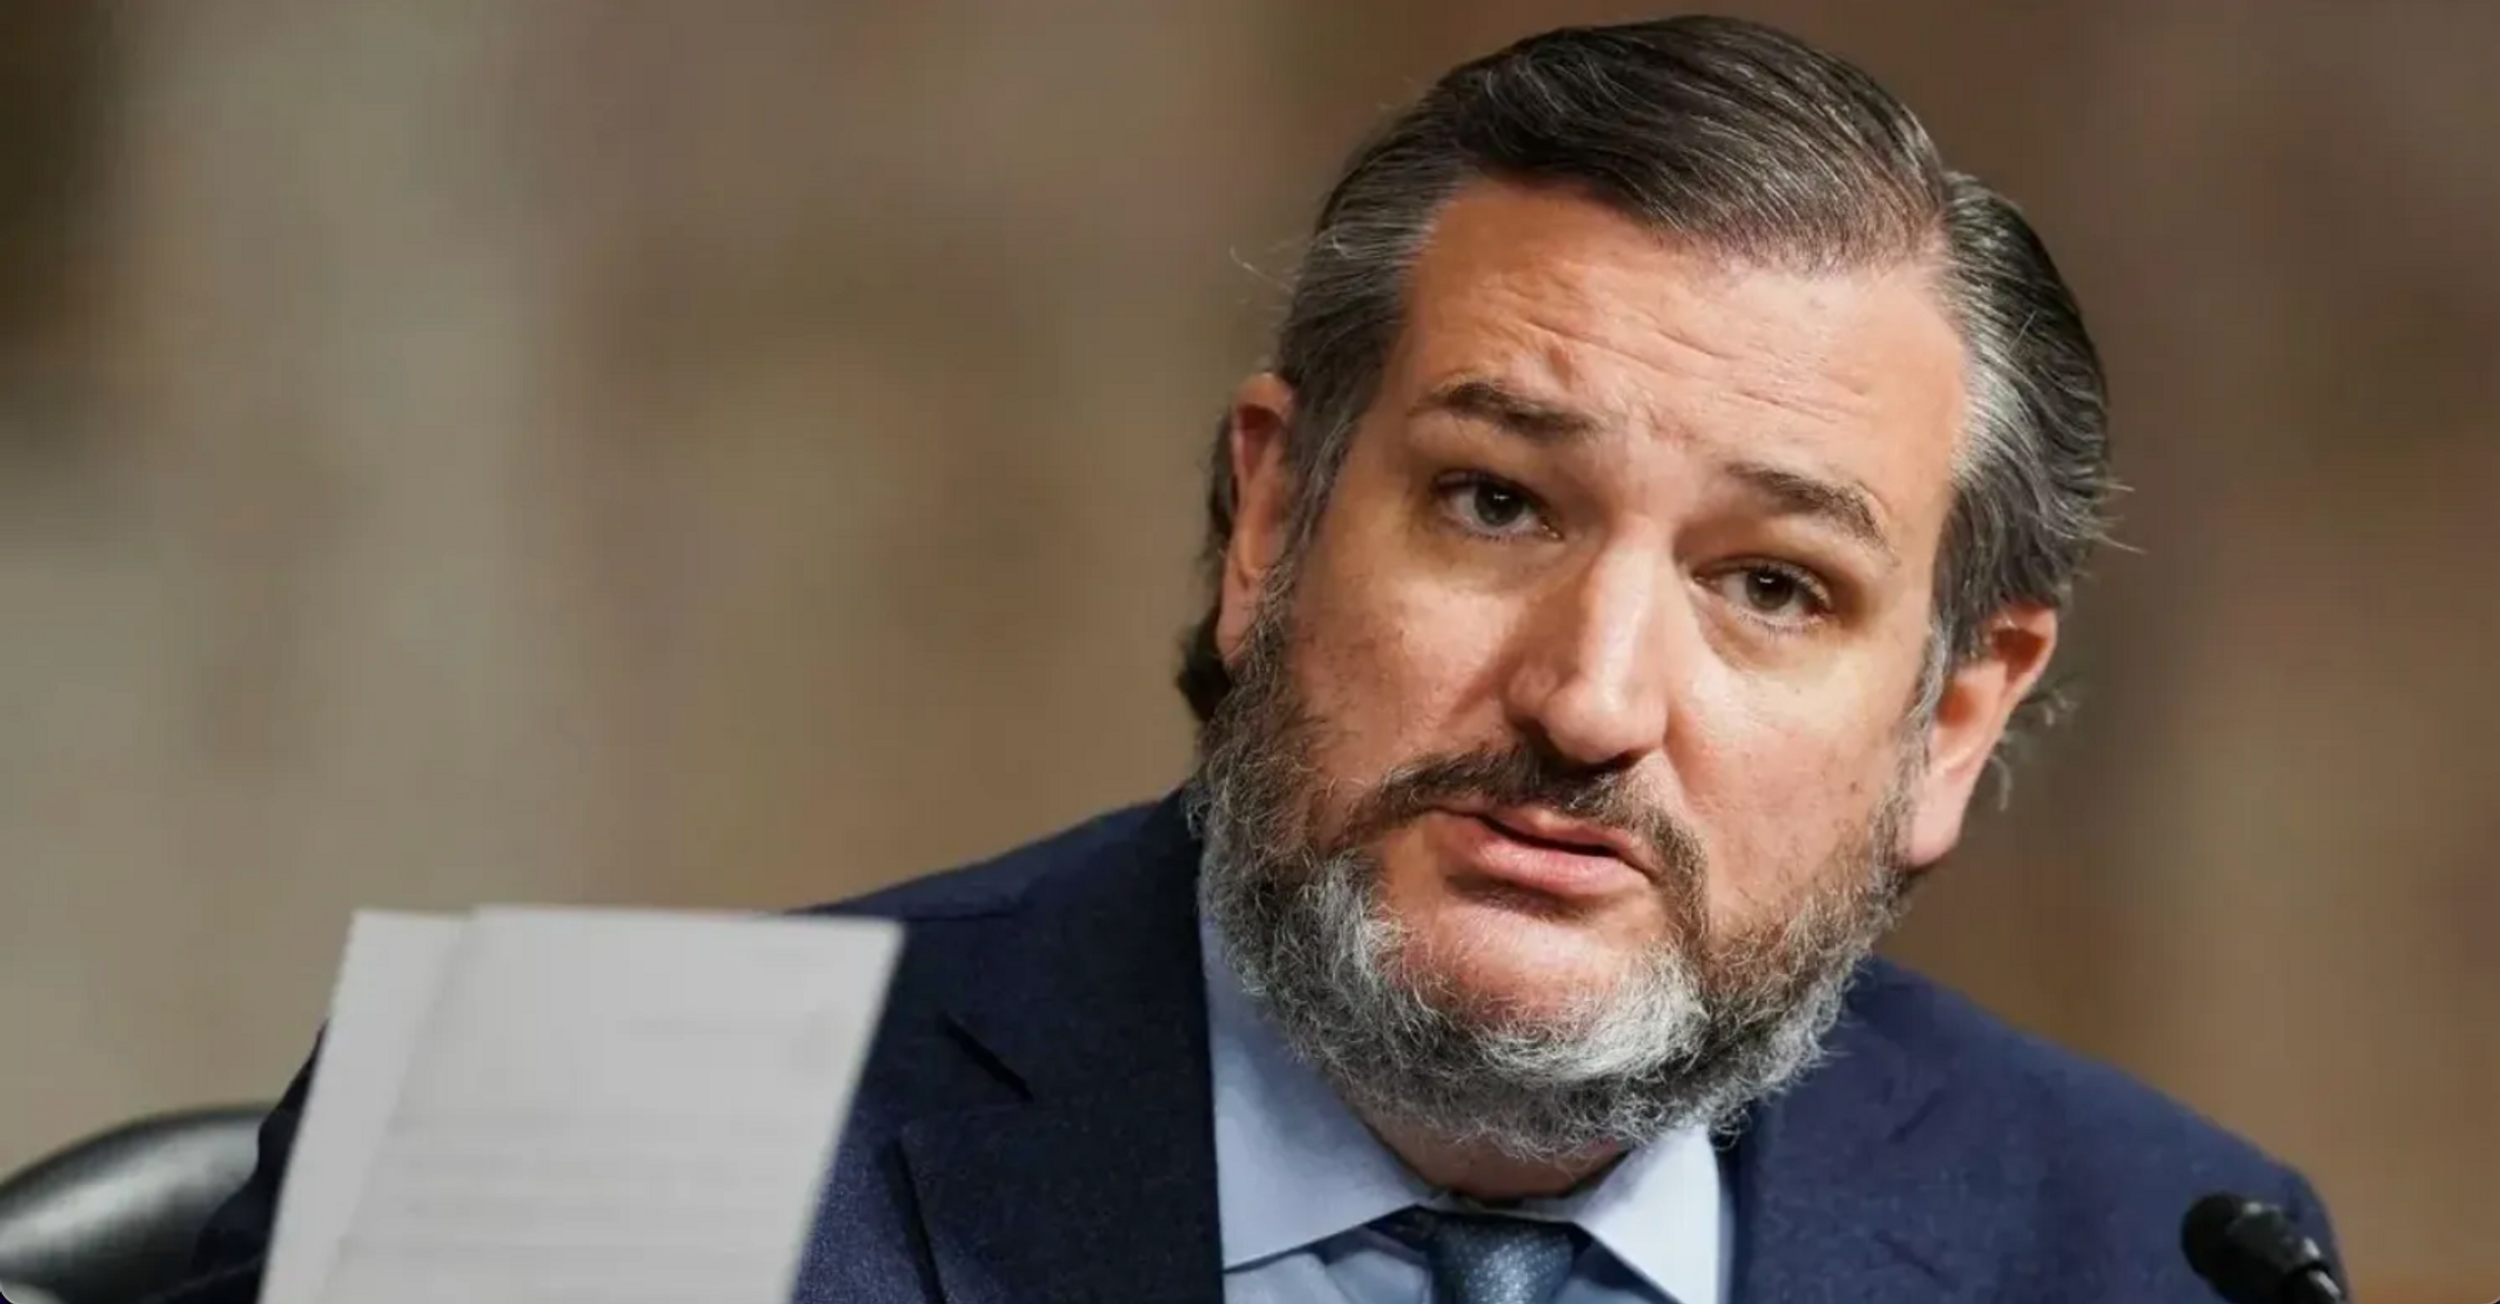 Ted Cruz Dragged After Complaining About Gas Prices Only To Then Join 'People's Convoy' Of Truckers